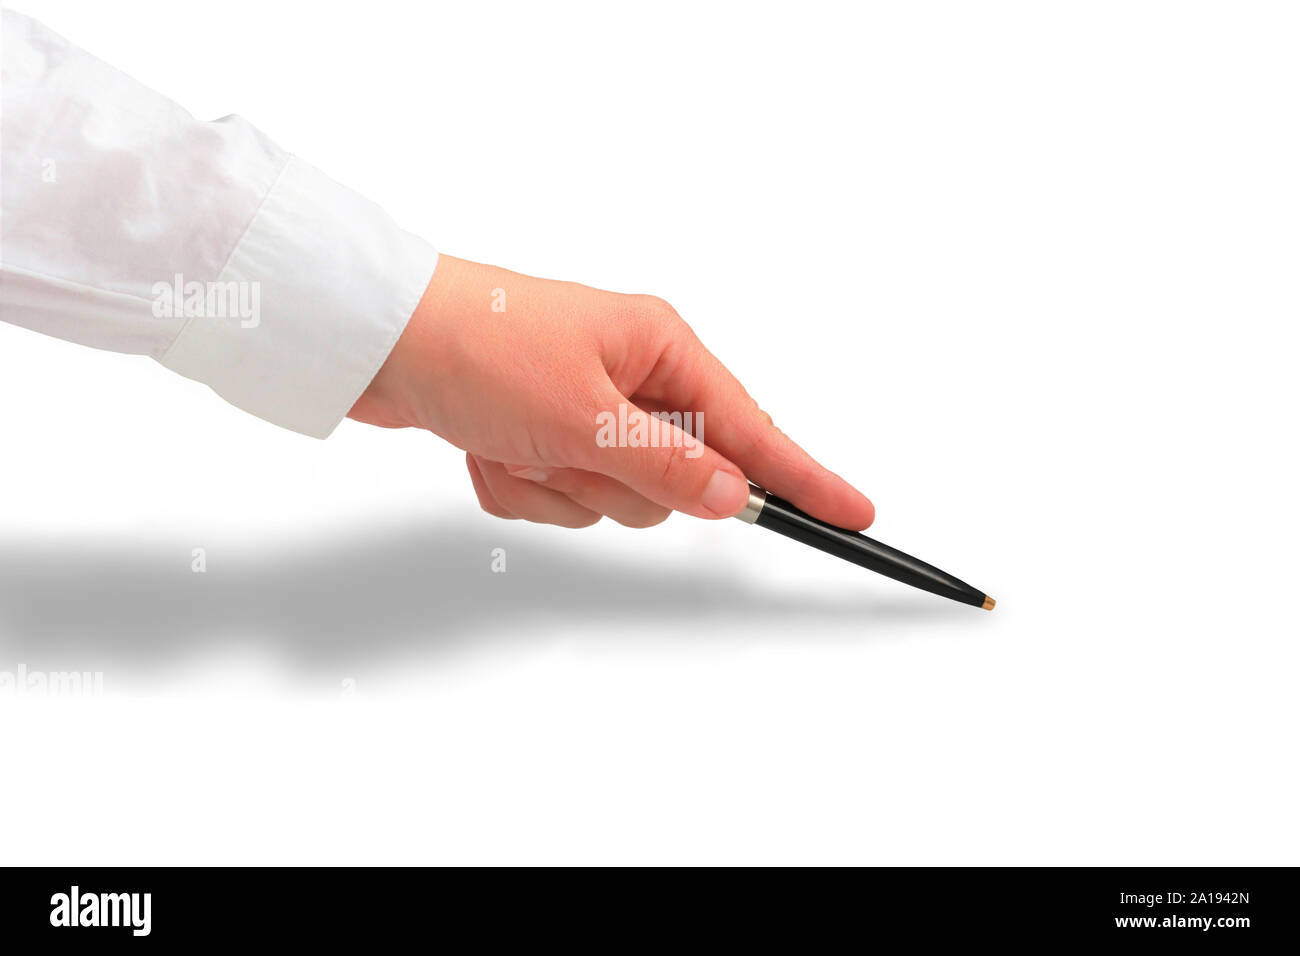 Woman's hand in white shirt sleeve pointing at something with a luxury pen. body part close up with a shadow isolated on white background Stock Photo